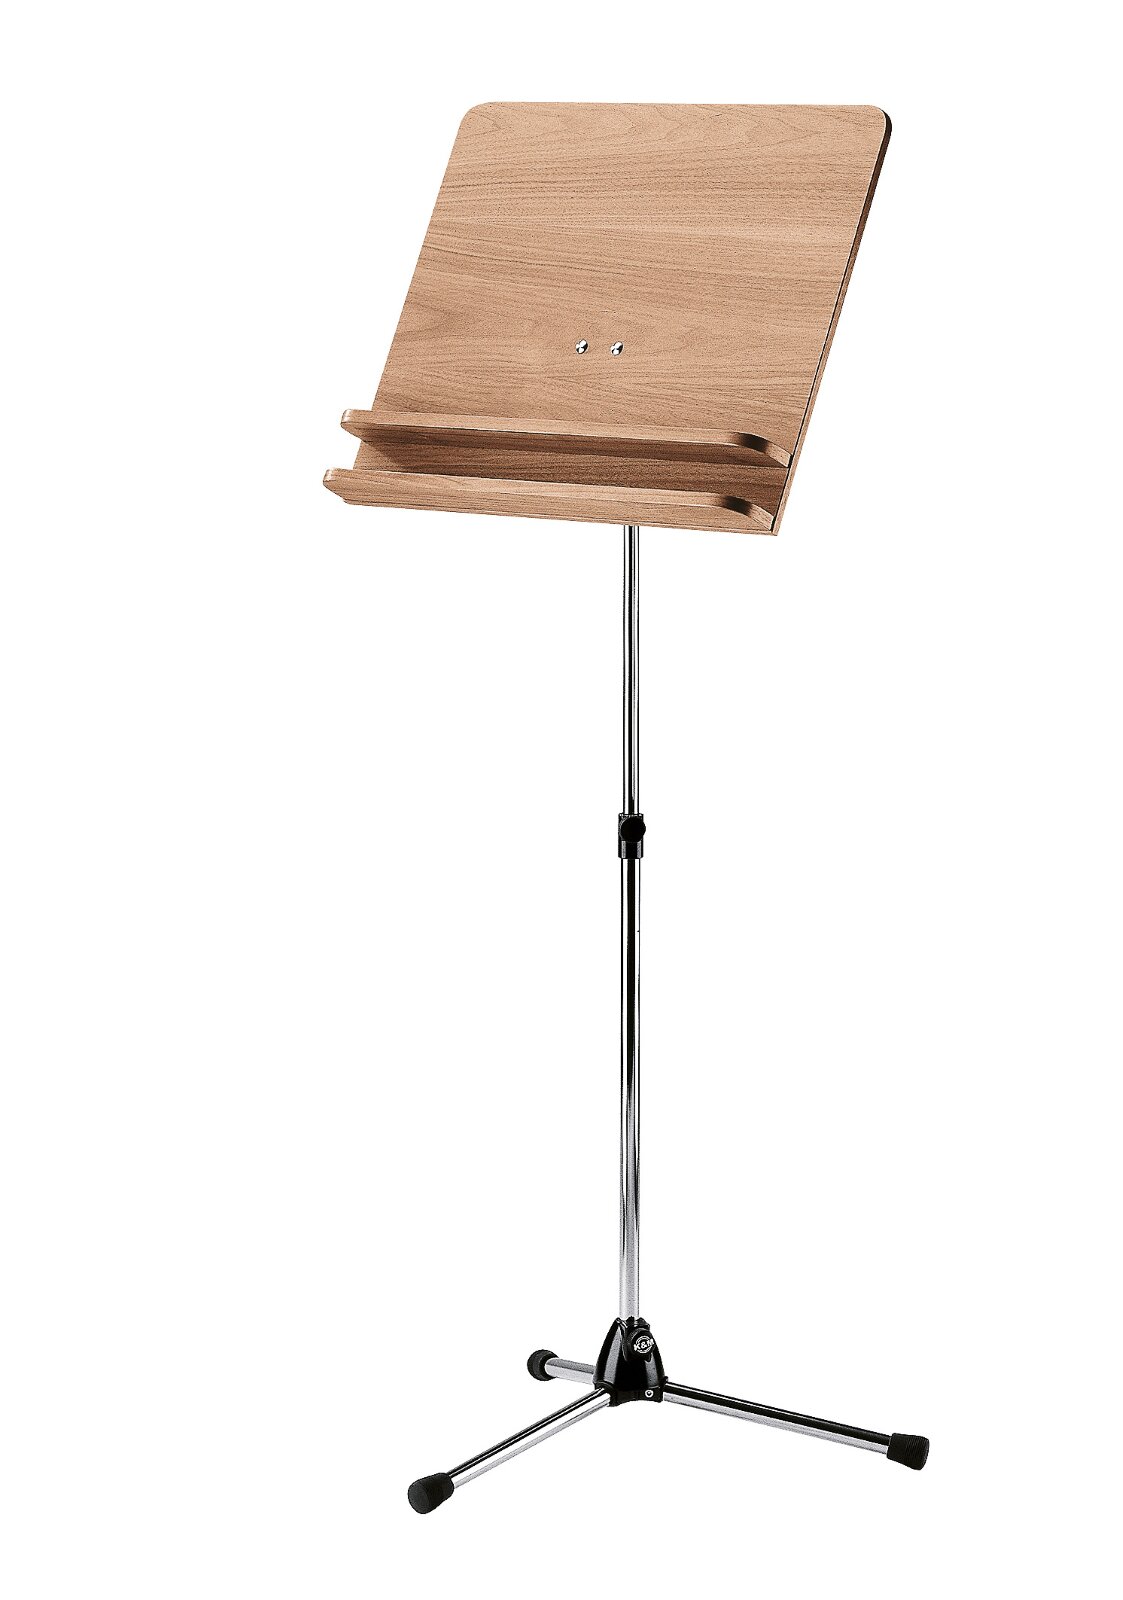 K & M 118/31 Orchestra music stand - chrome stand with walnut wooden desk : photo 1